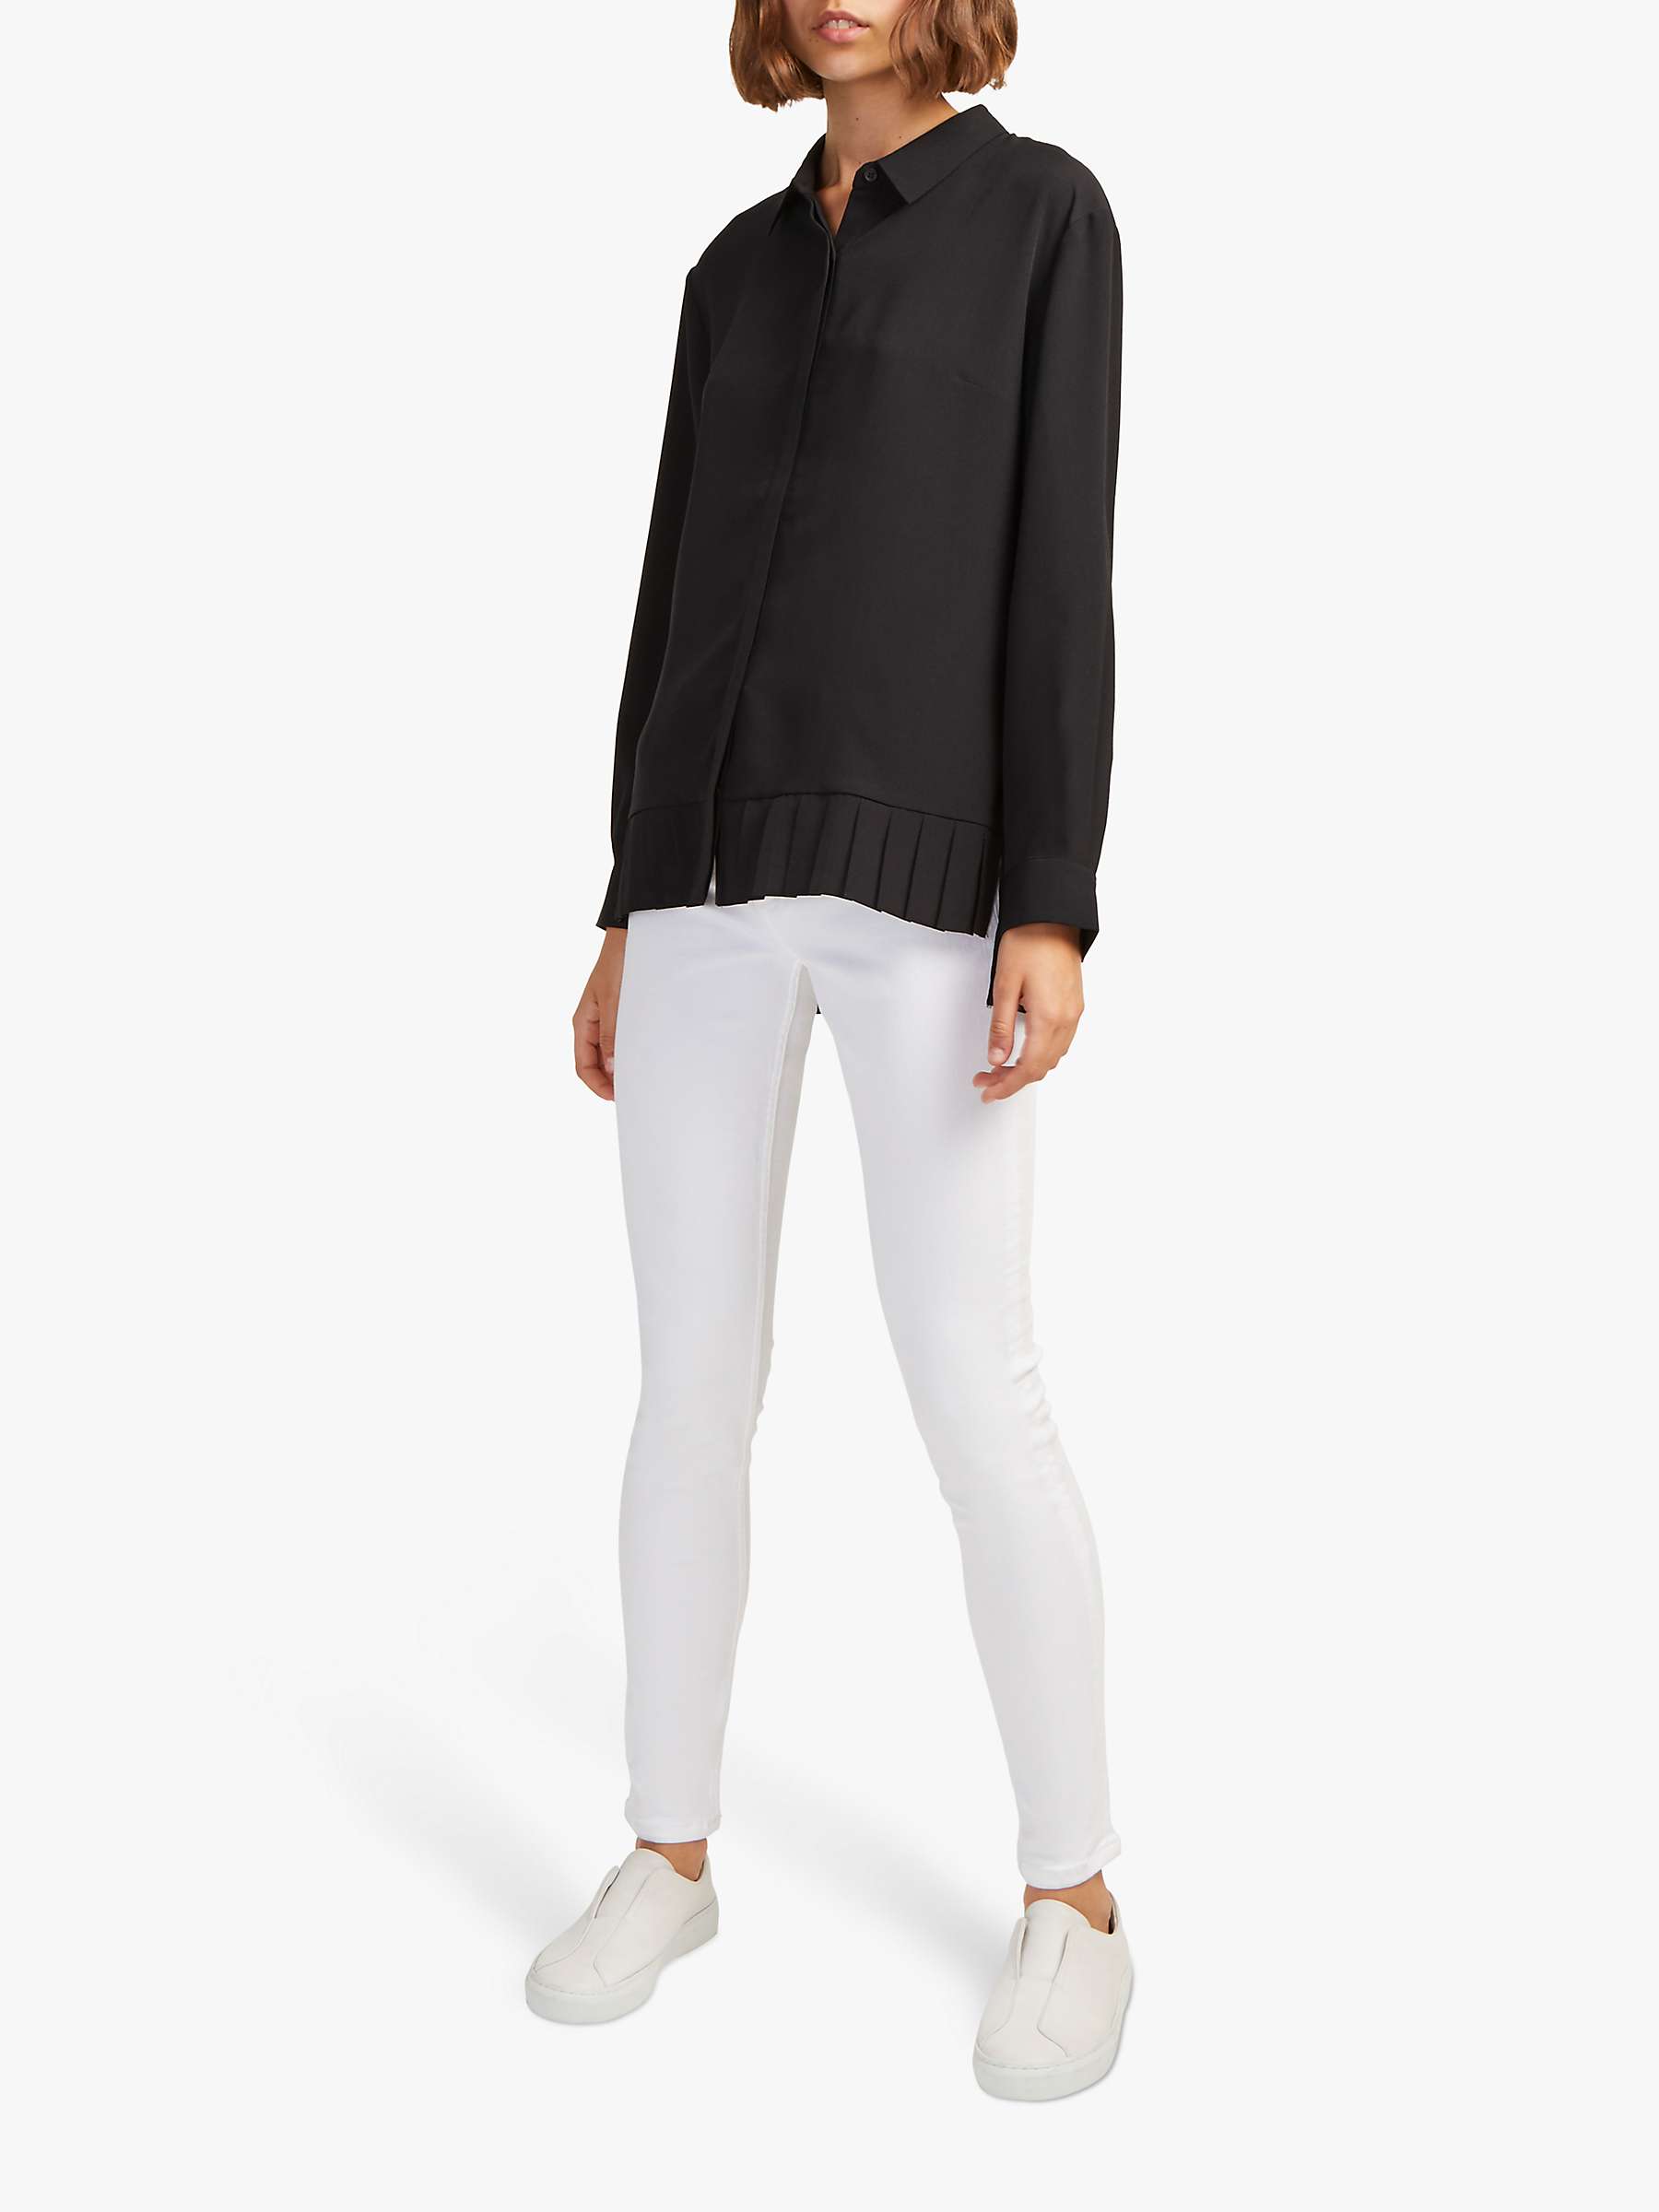 Buy French Connection Crepe Pleat Shirt Online at johnlewis.com